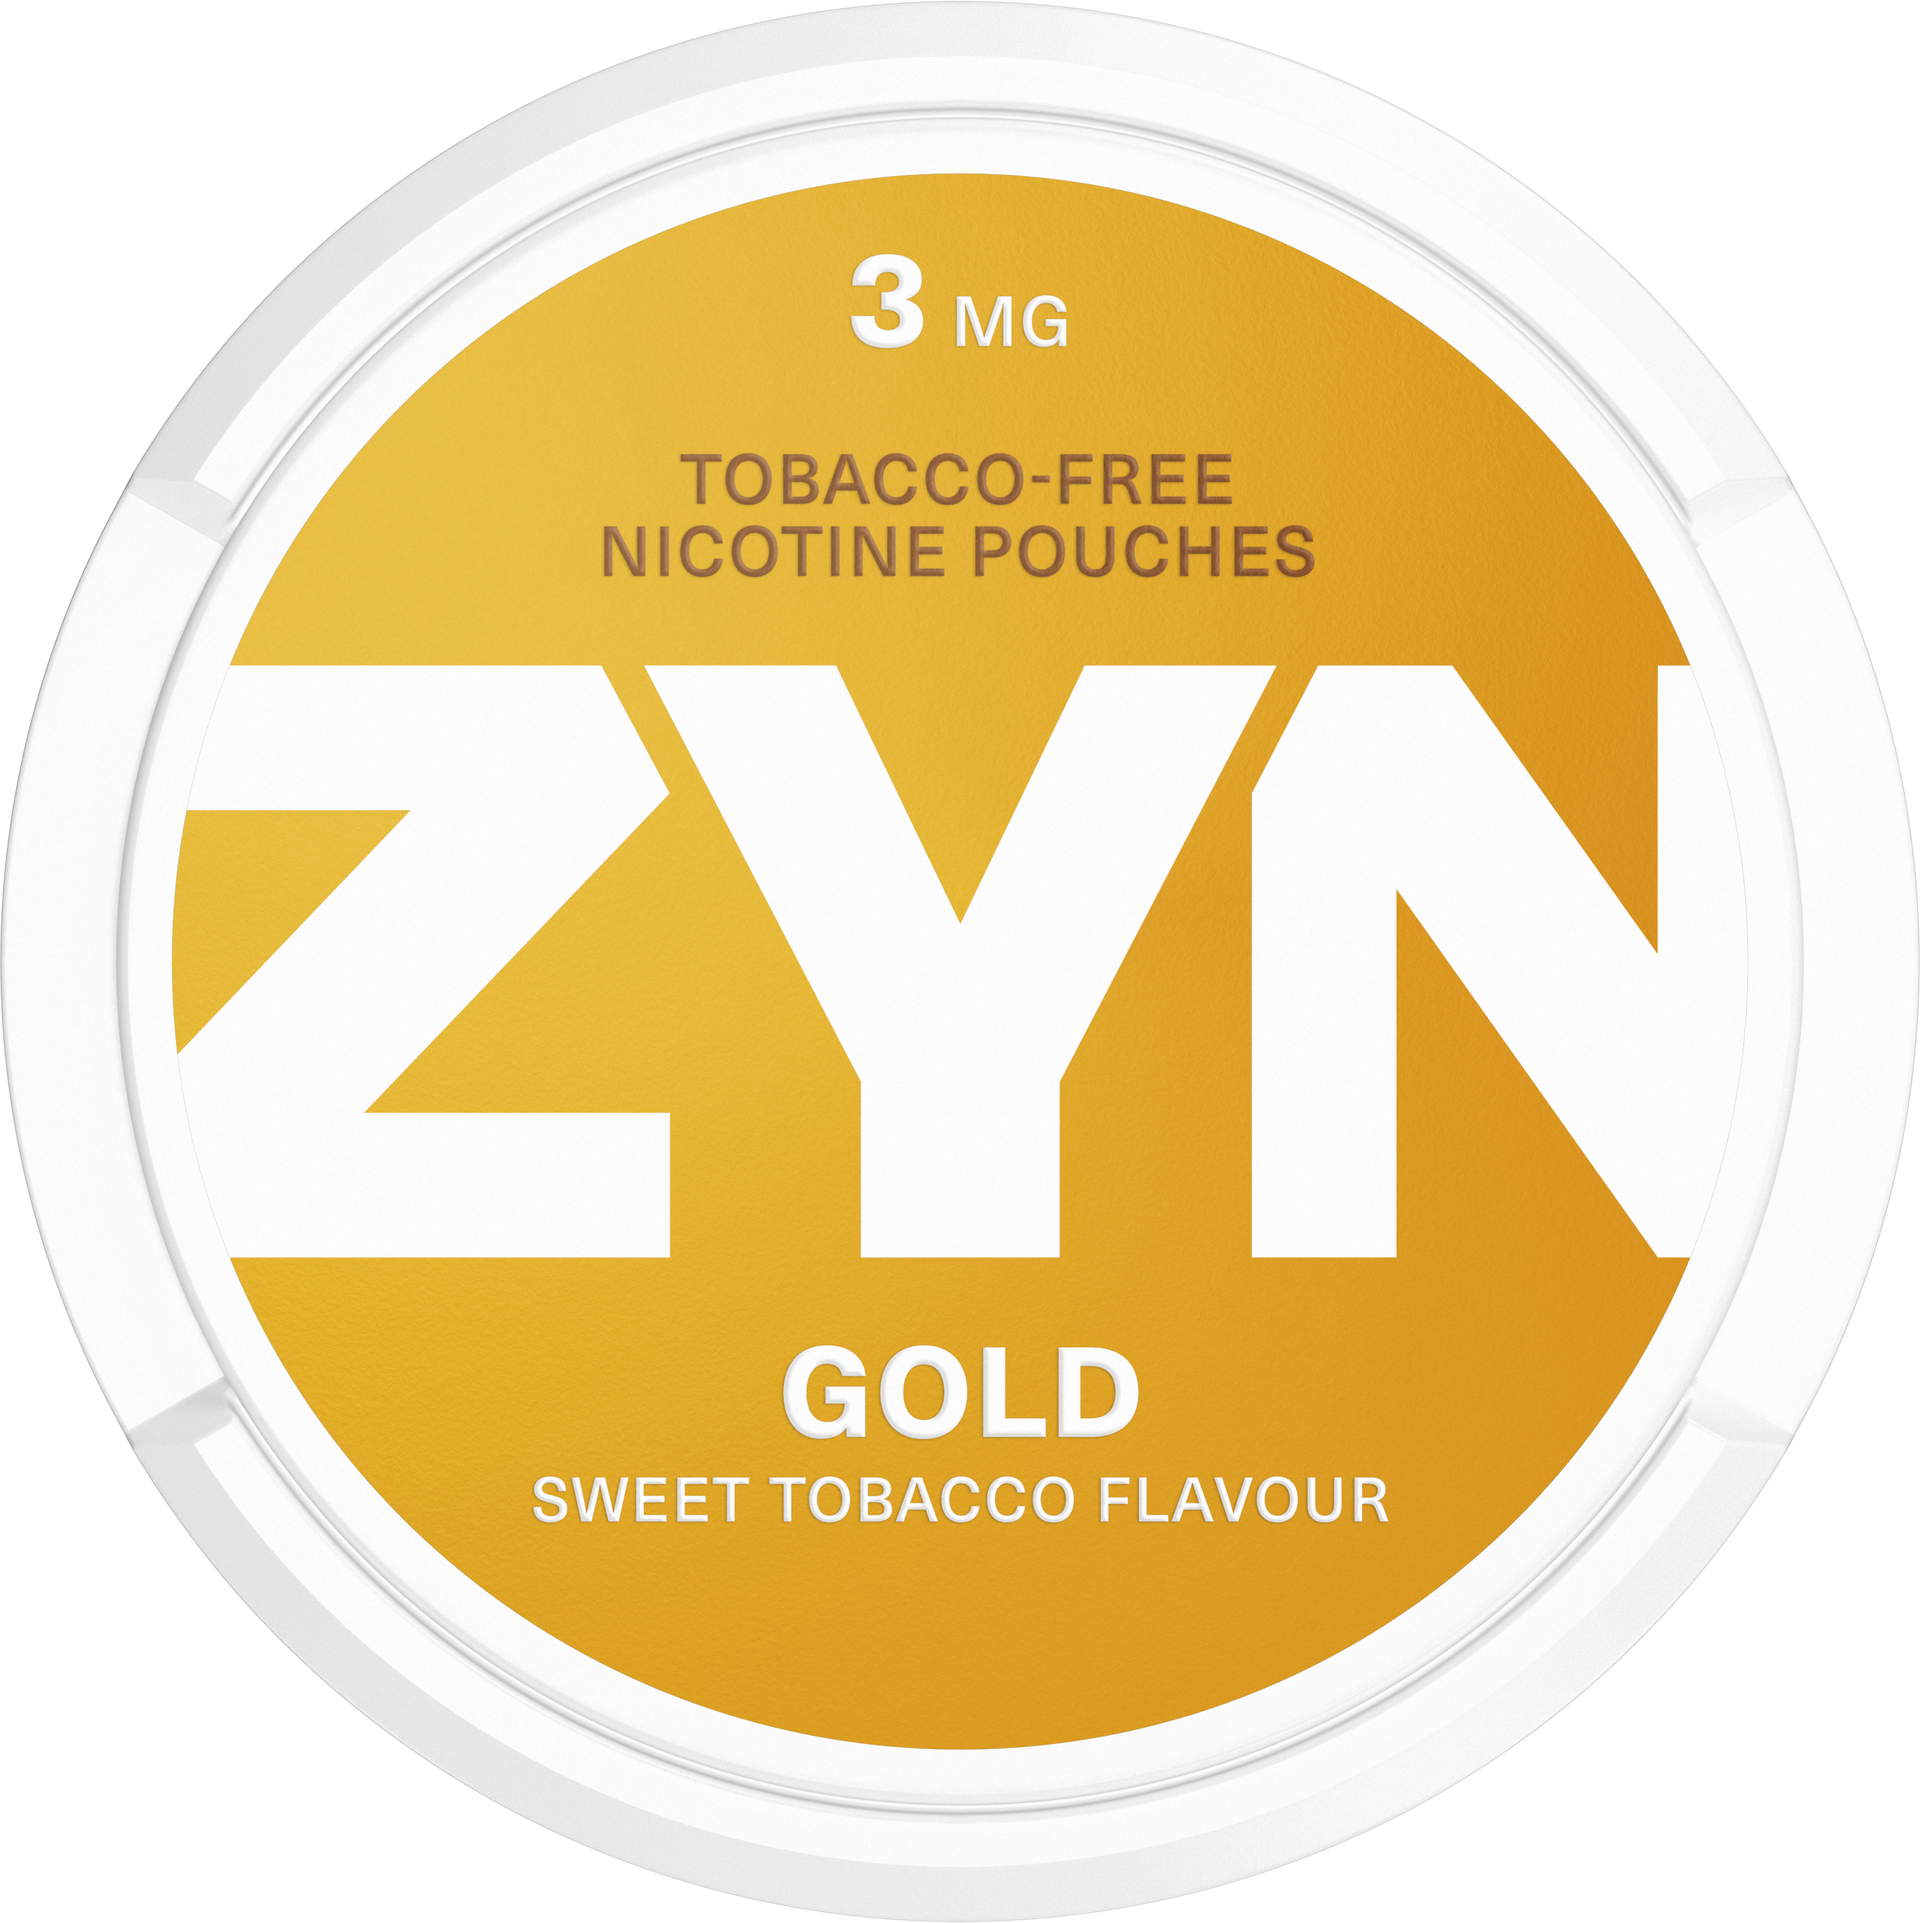 New tobacco-flavoured nicotine pouch from Zyn